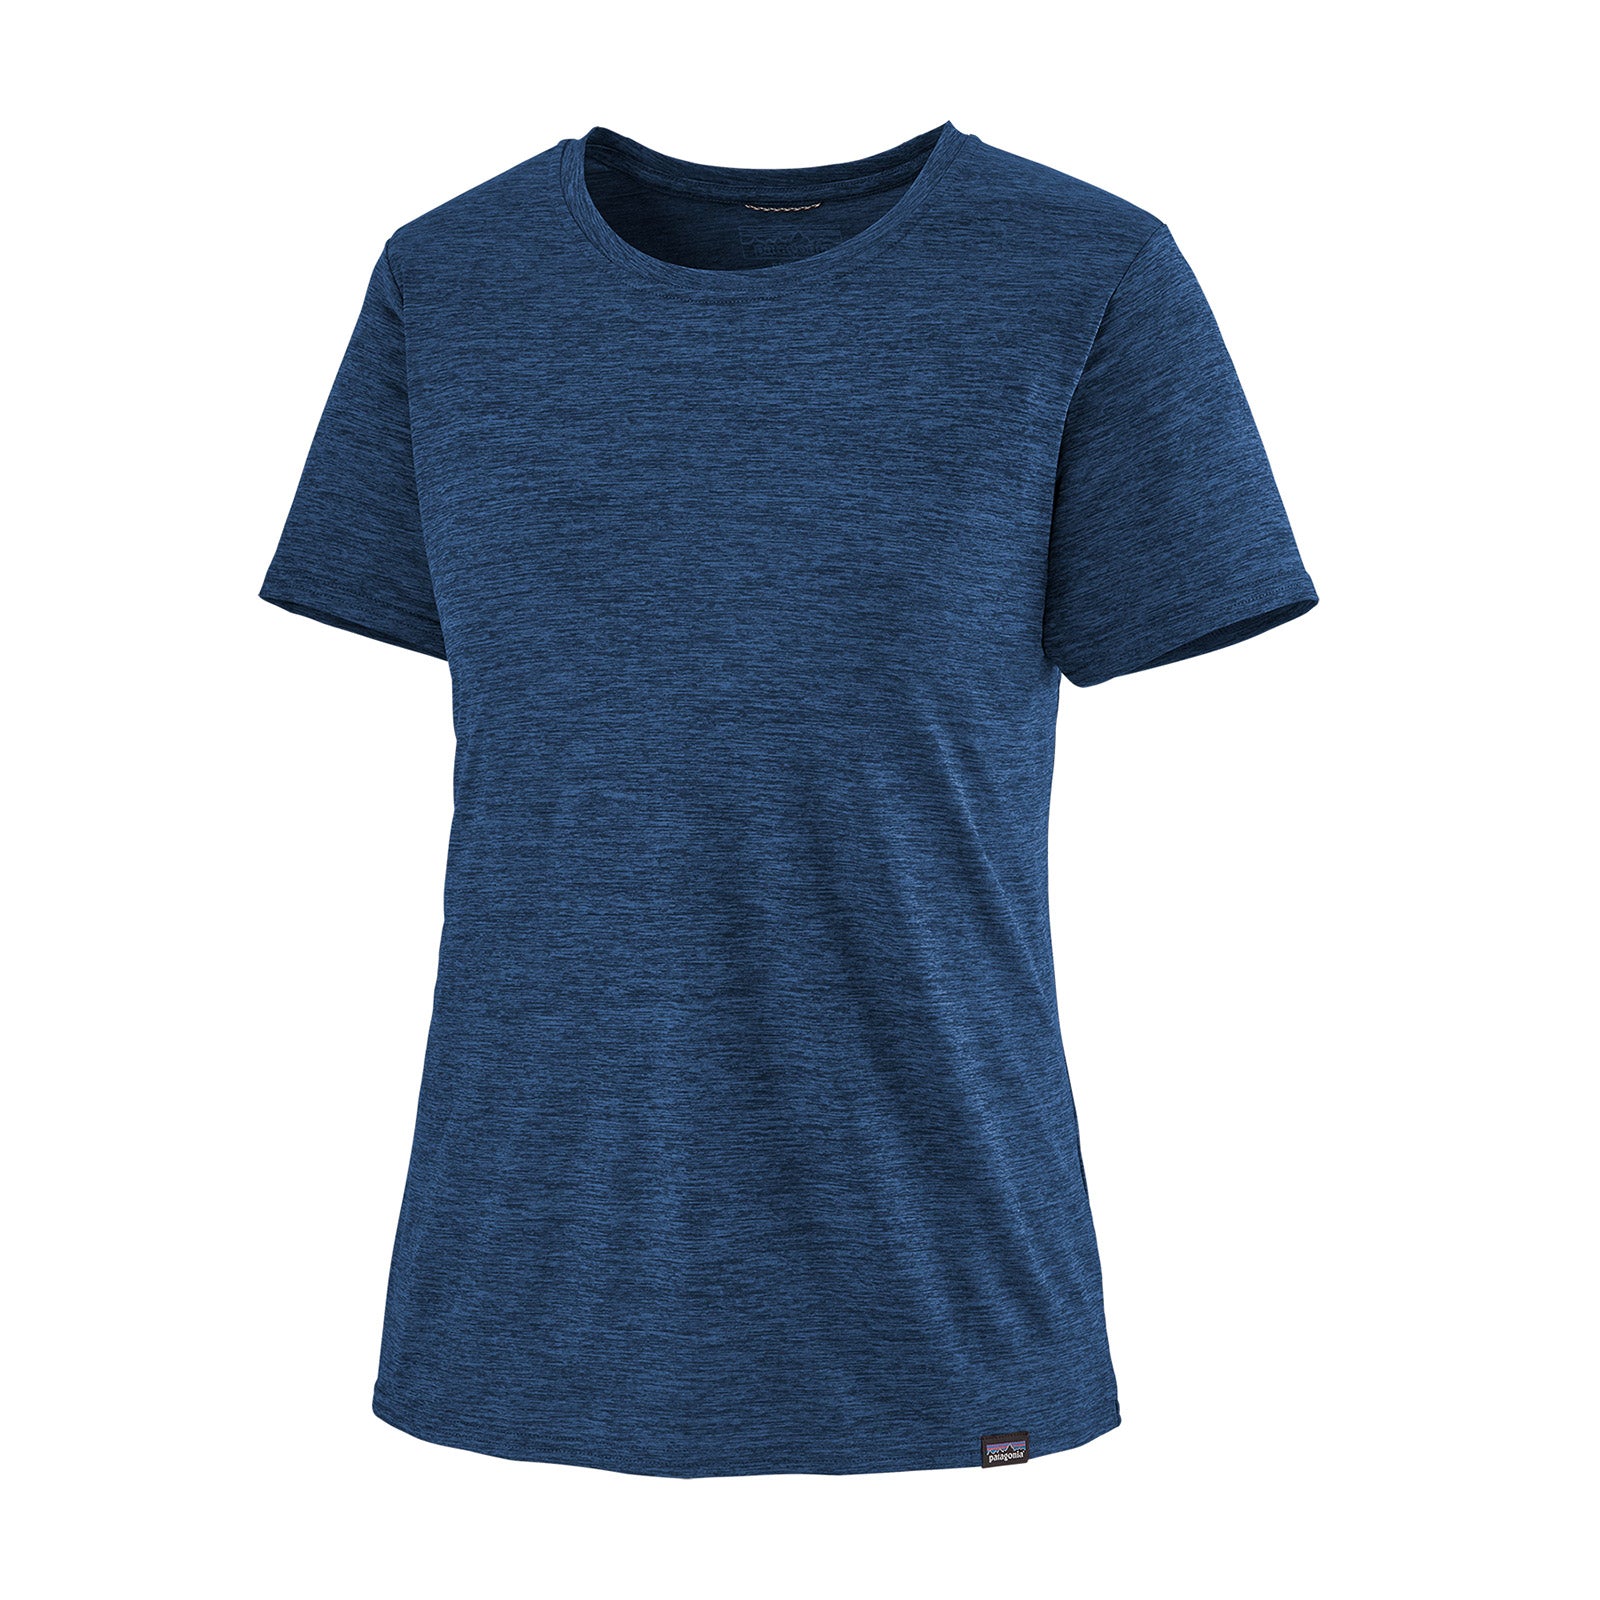 patagonia womens short sleeve capilene cool daily shirt in viking blue navy blue x dye, front view